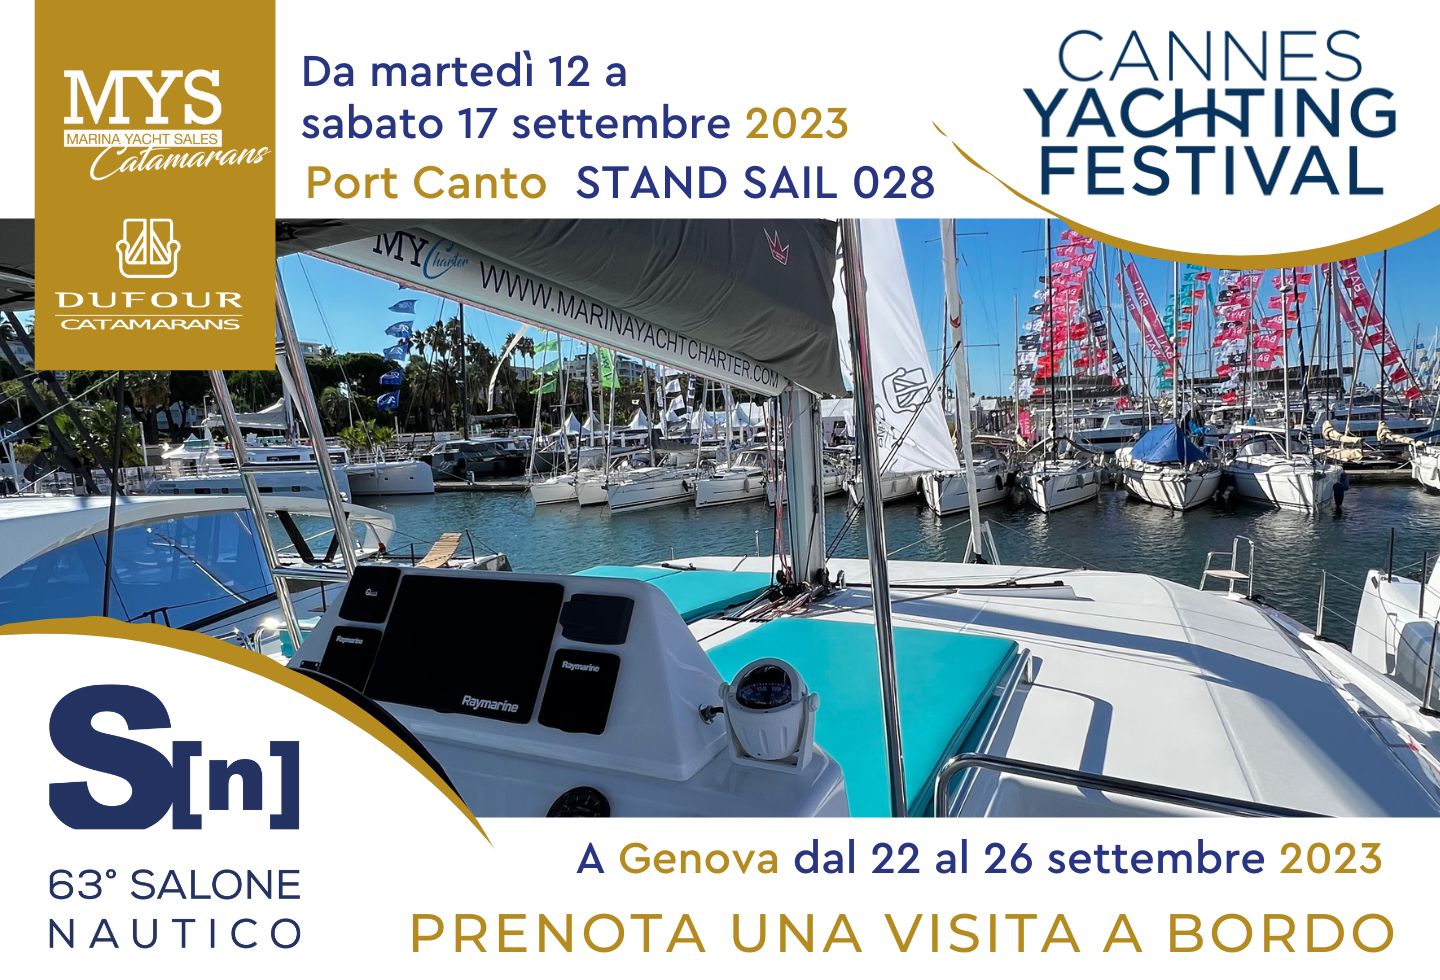 Cannes yachting festival 2023 catamarans